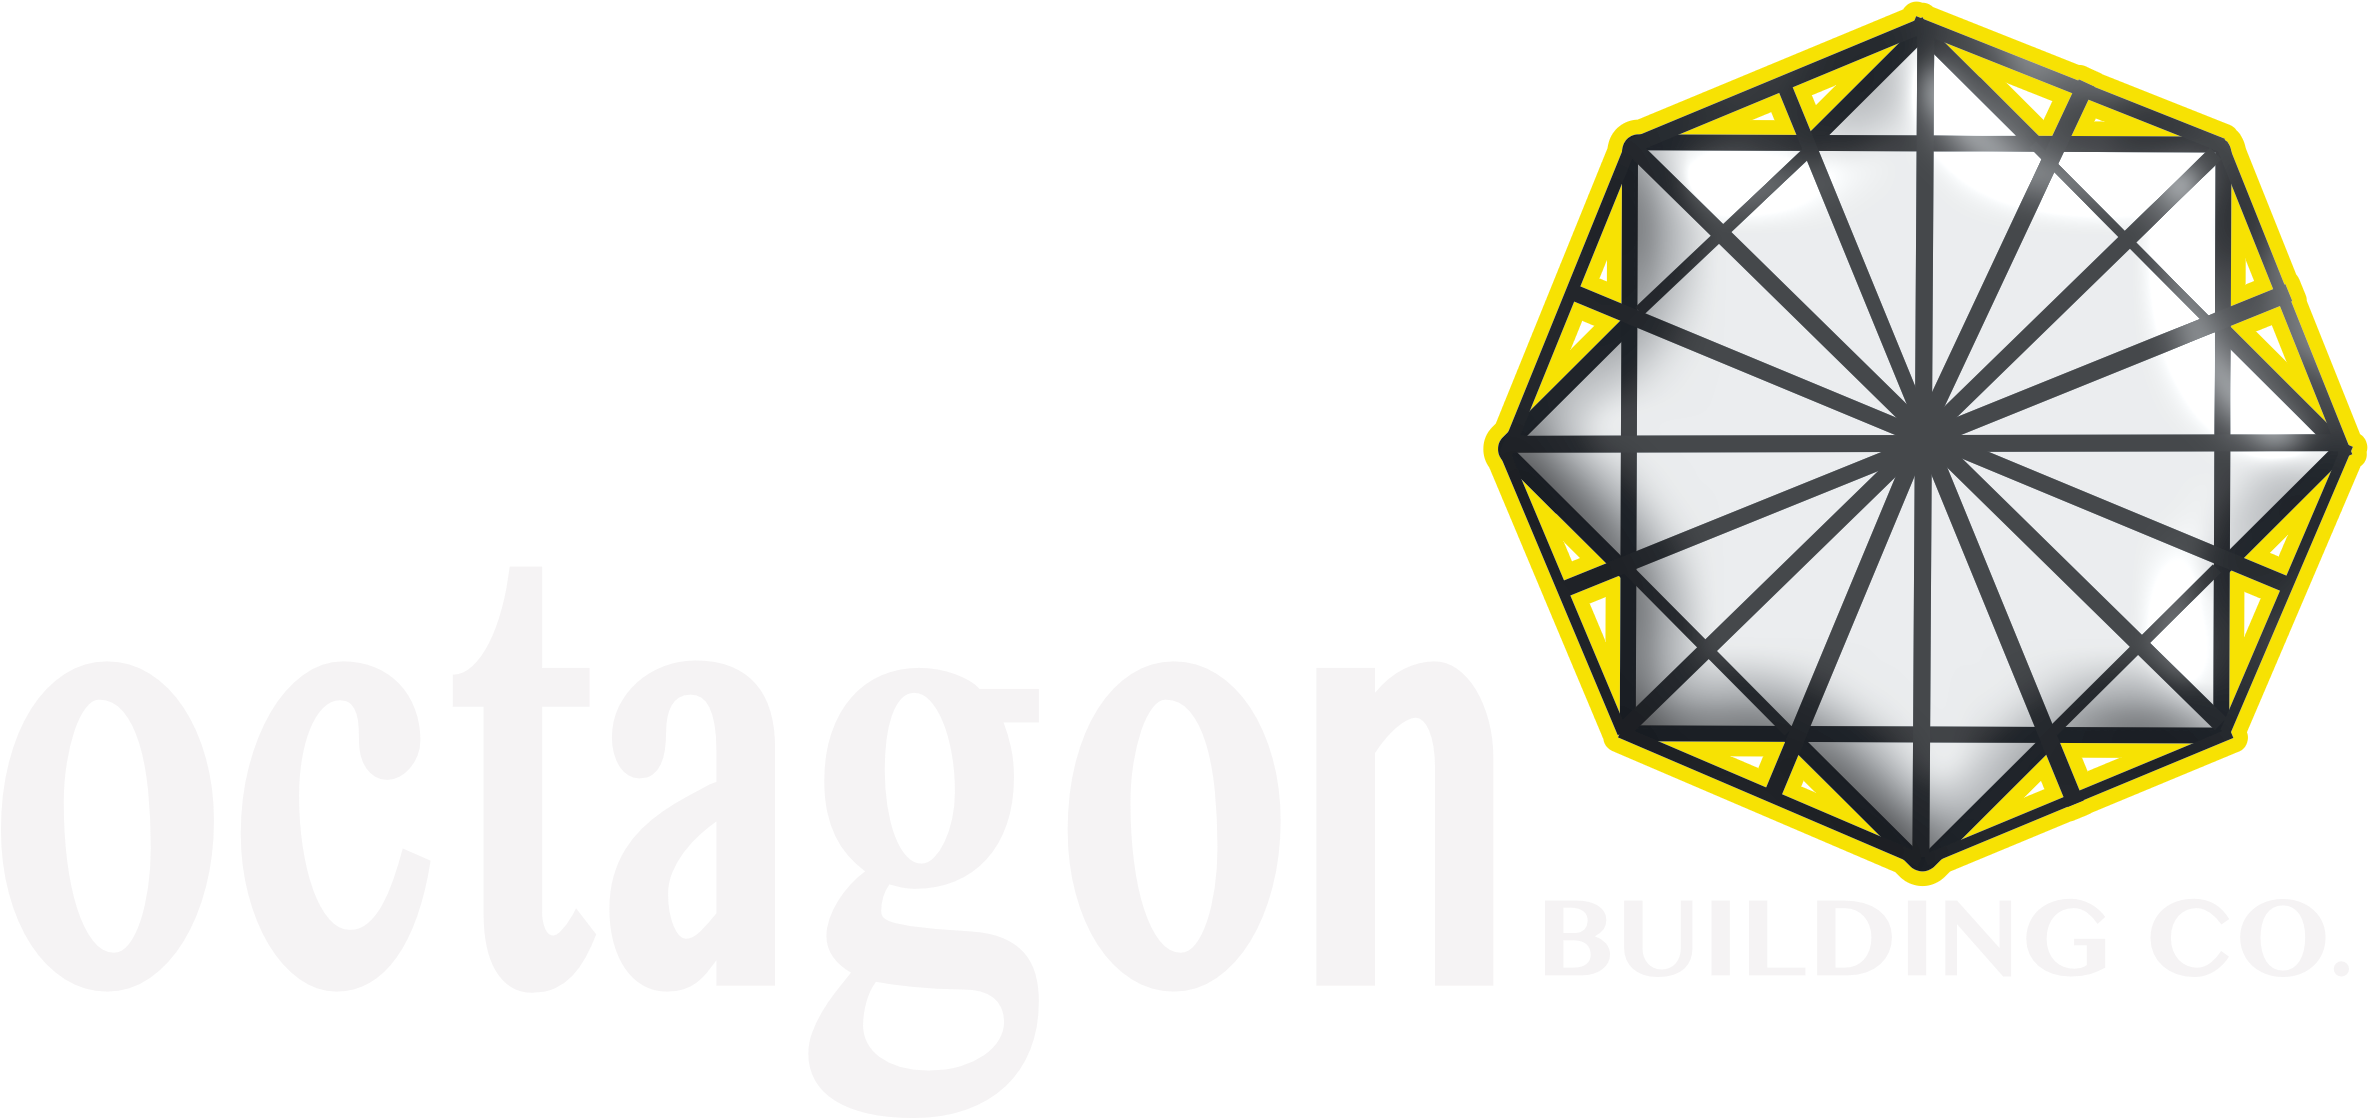 Octagon Building Company Is A Family Owned And Operated - Triangle (2467x1217)